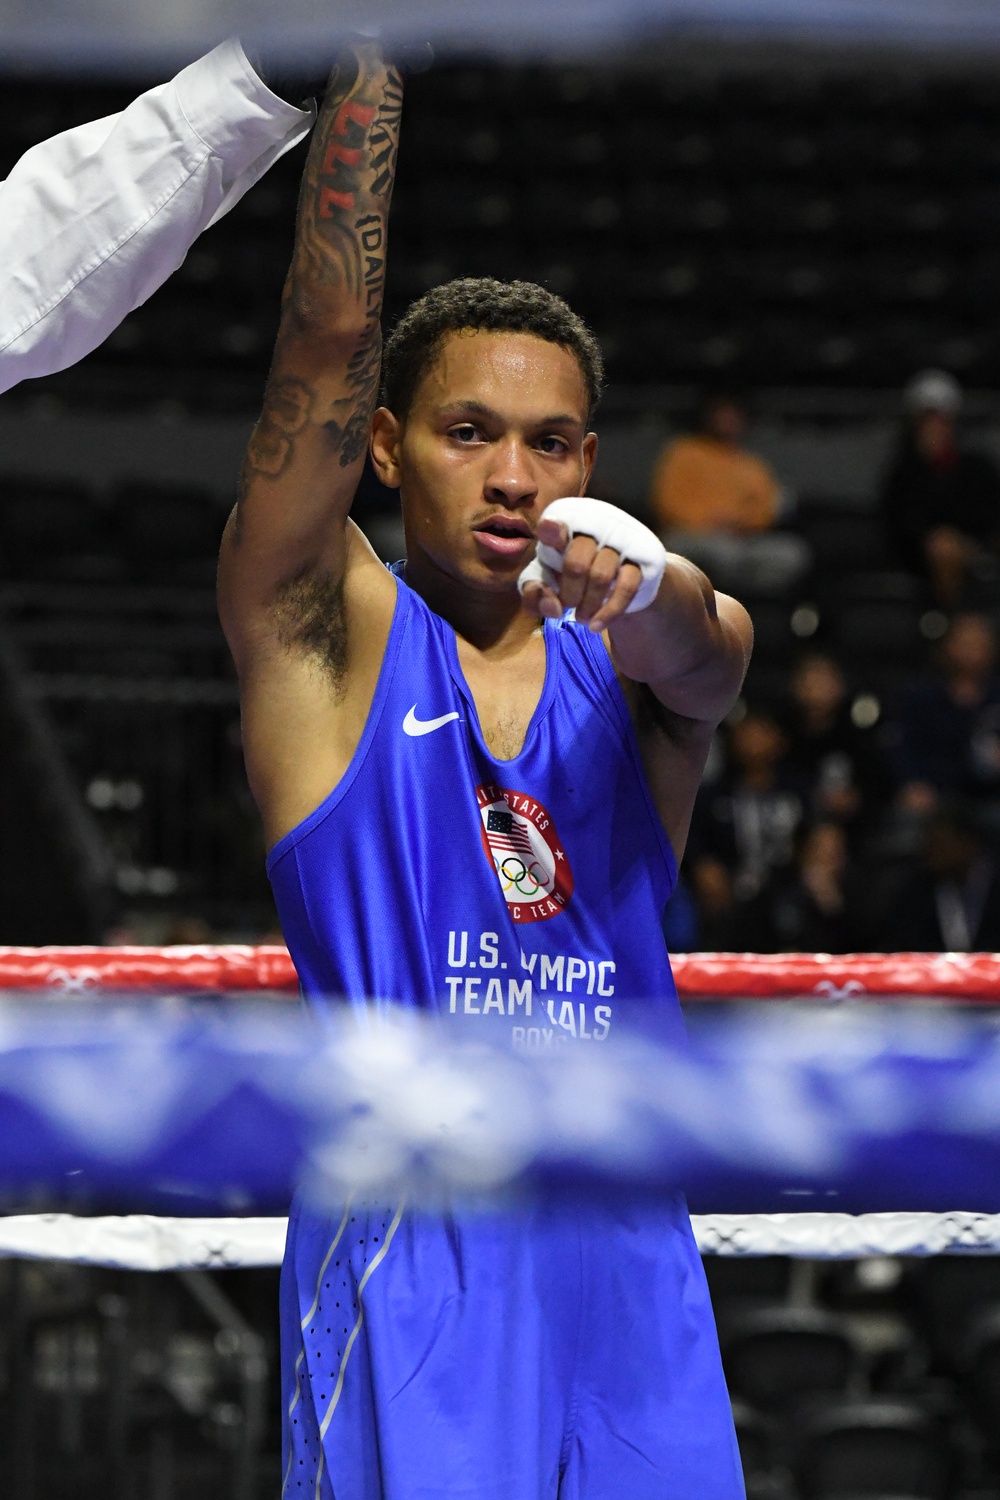 SPC Eli Lankford wins his opening bout in the 2024 U.S. Olympic Team Trials for Boxing